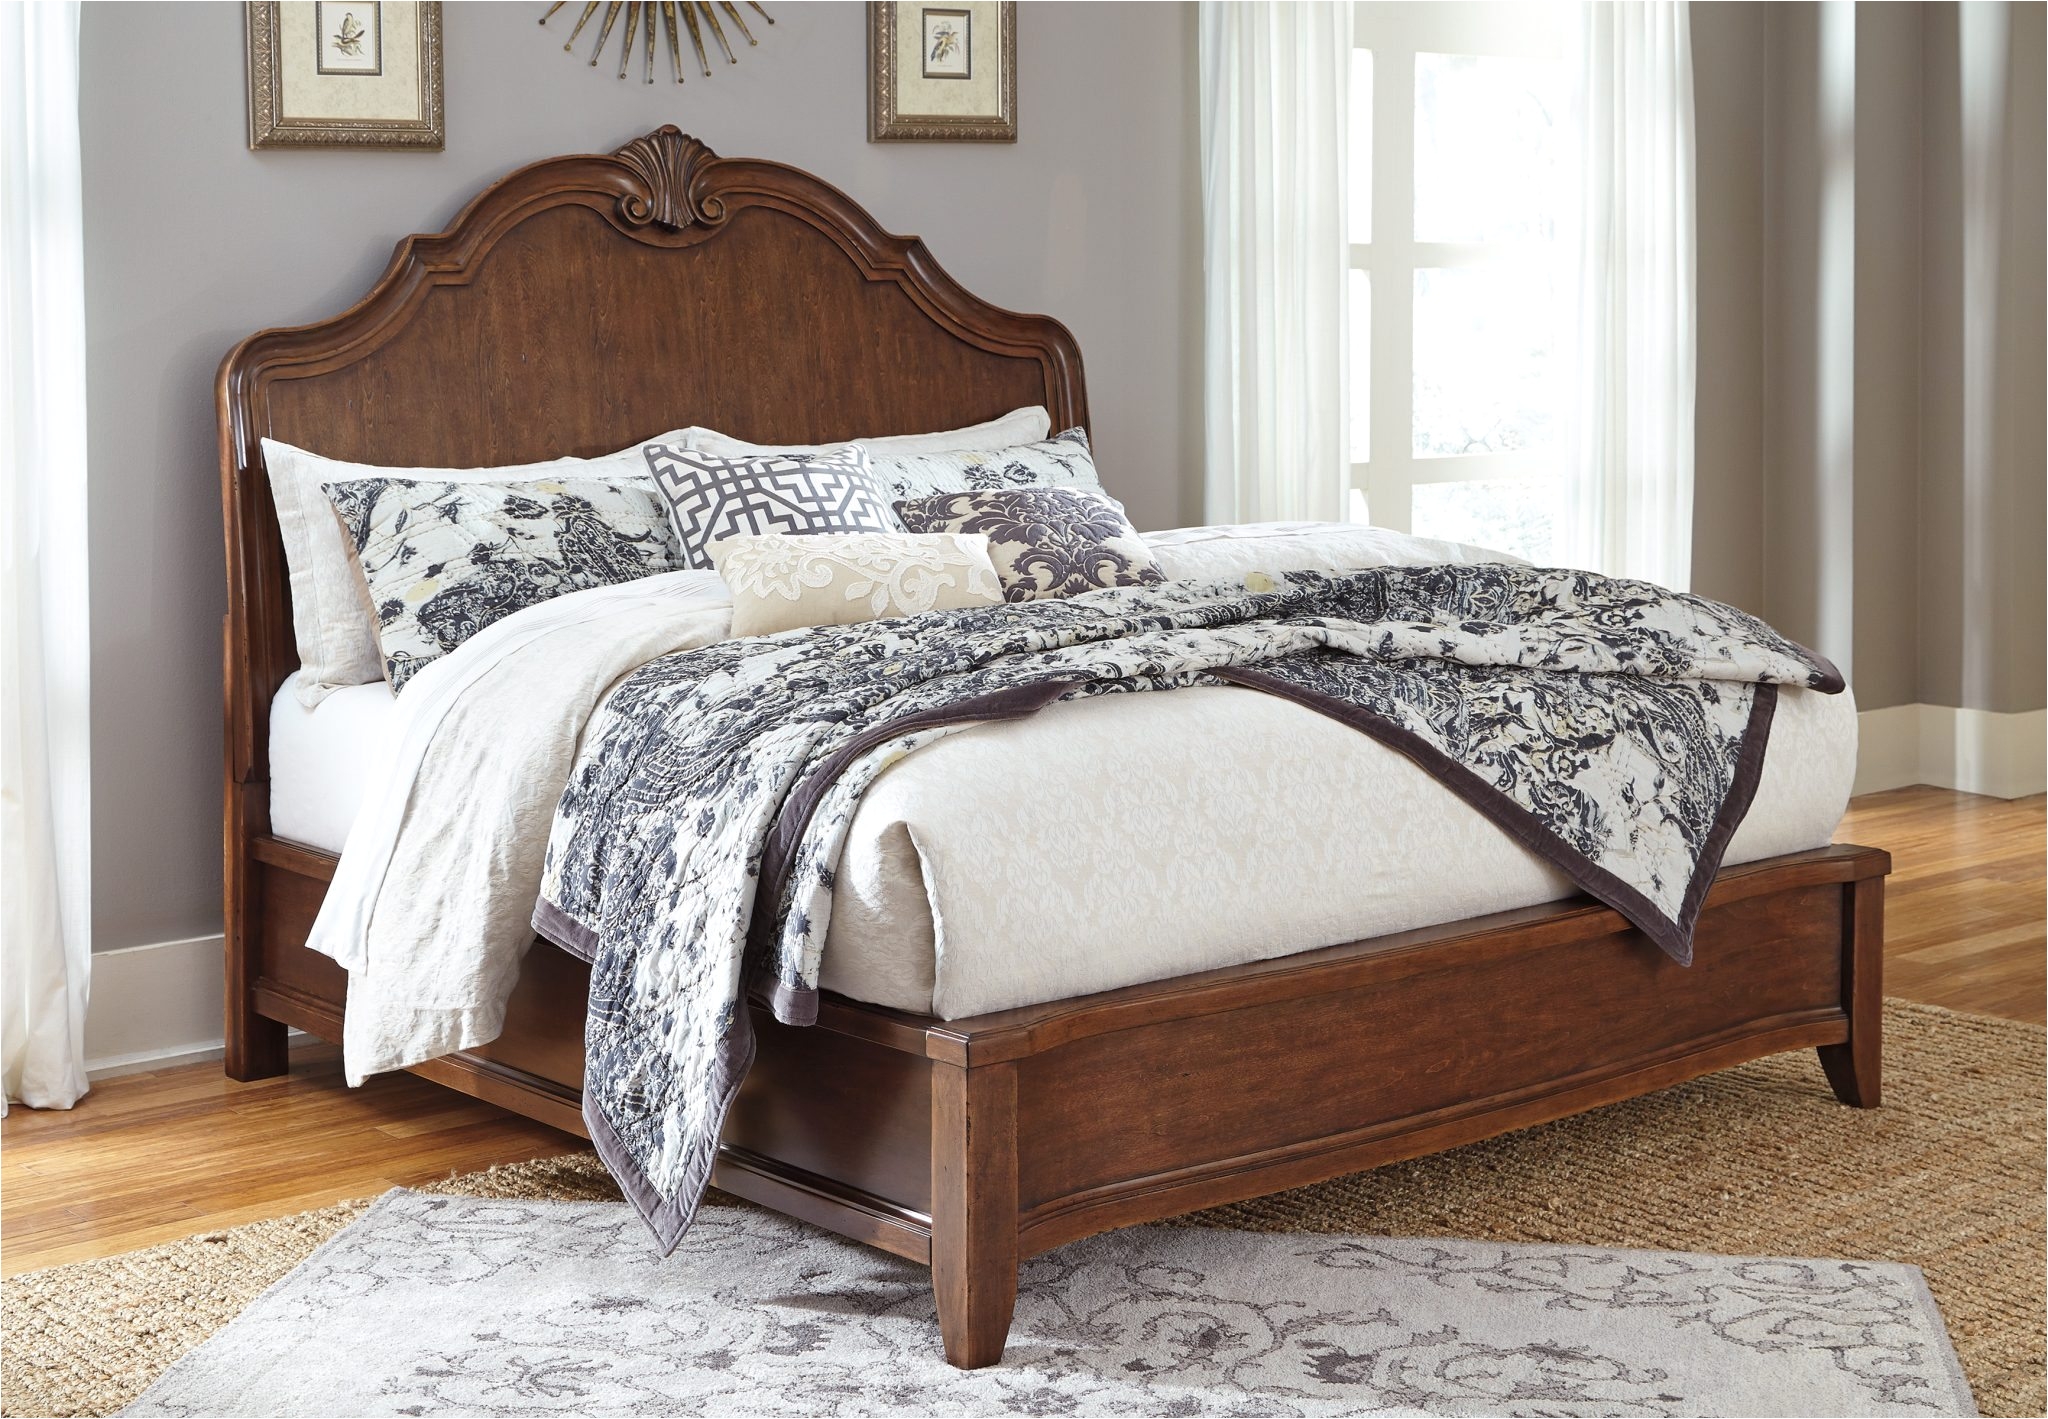 balinder queen ashley furniture sleigh bed in brown for bedroom furniture ideas